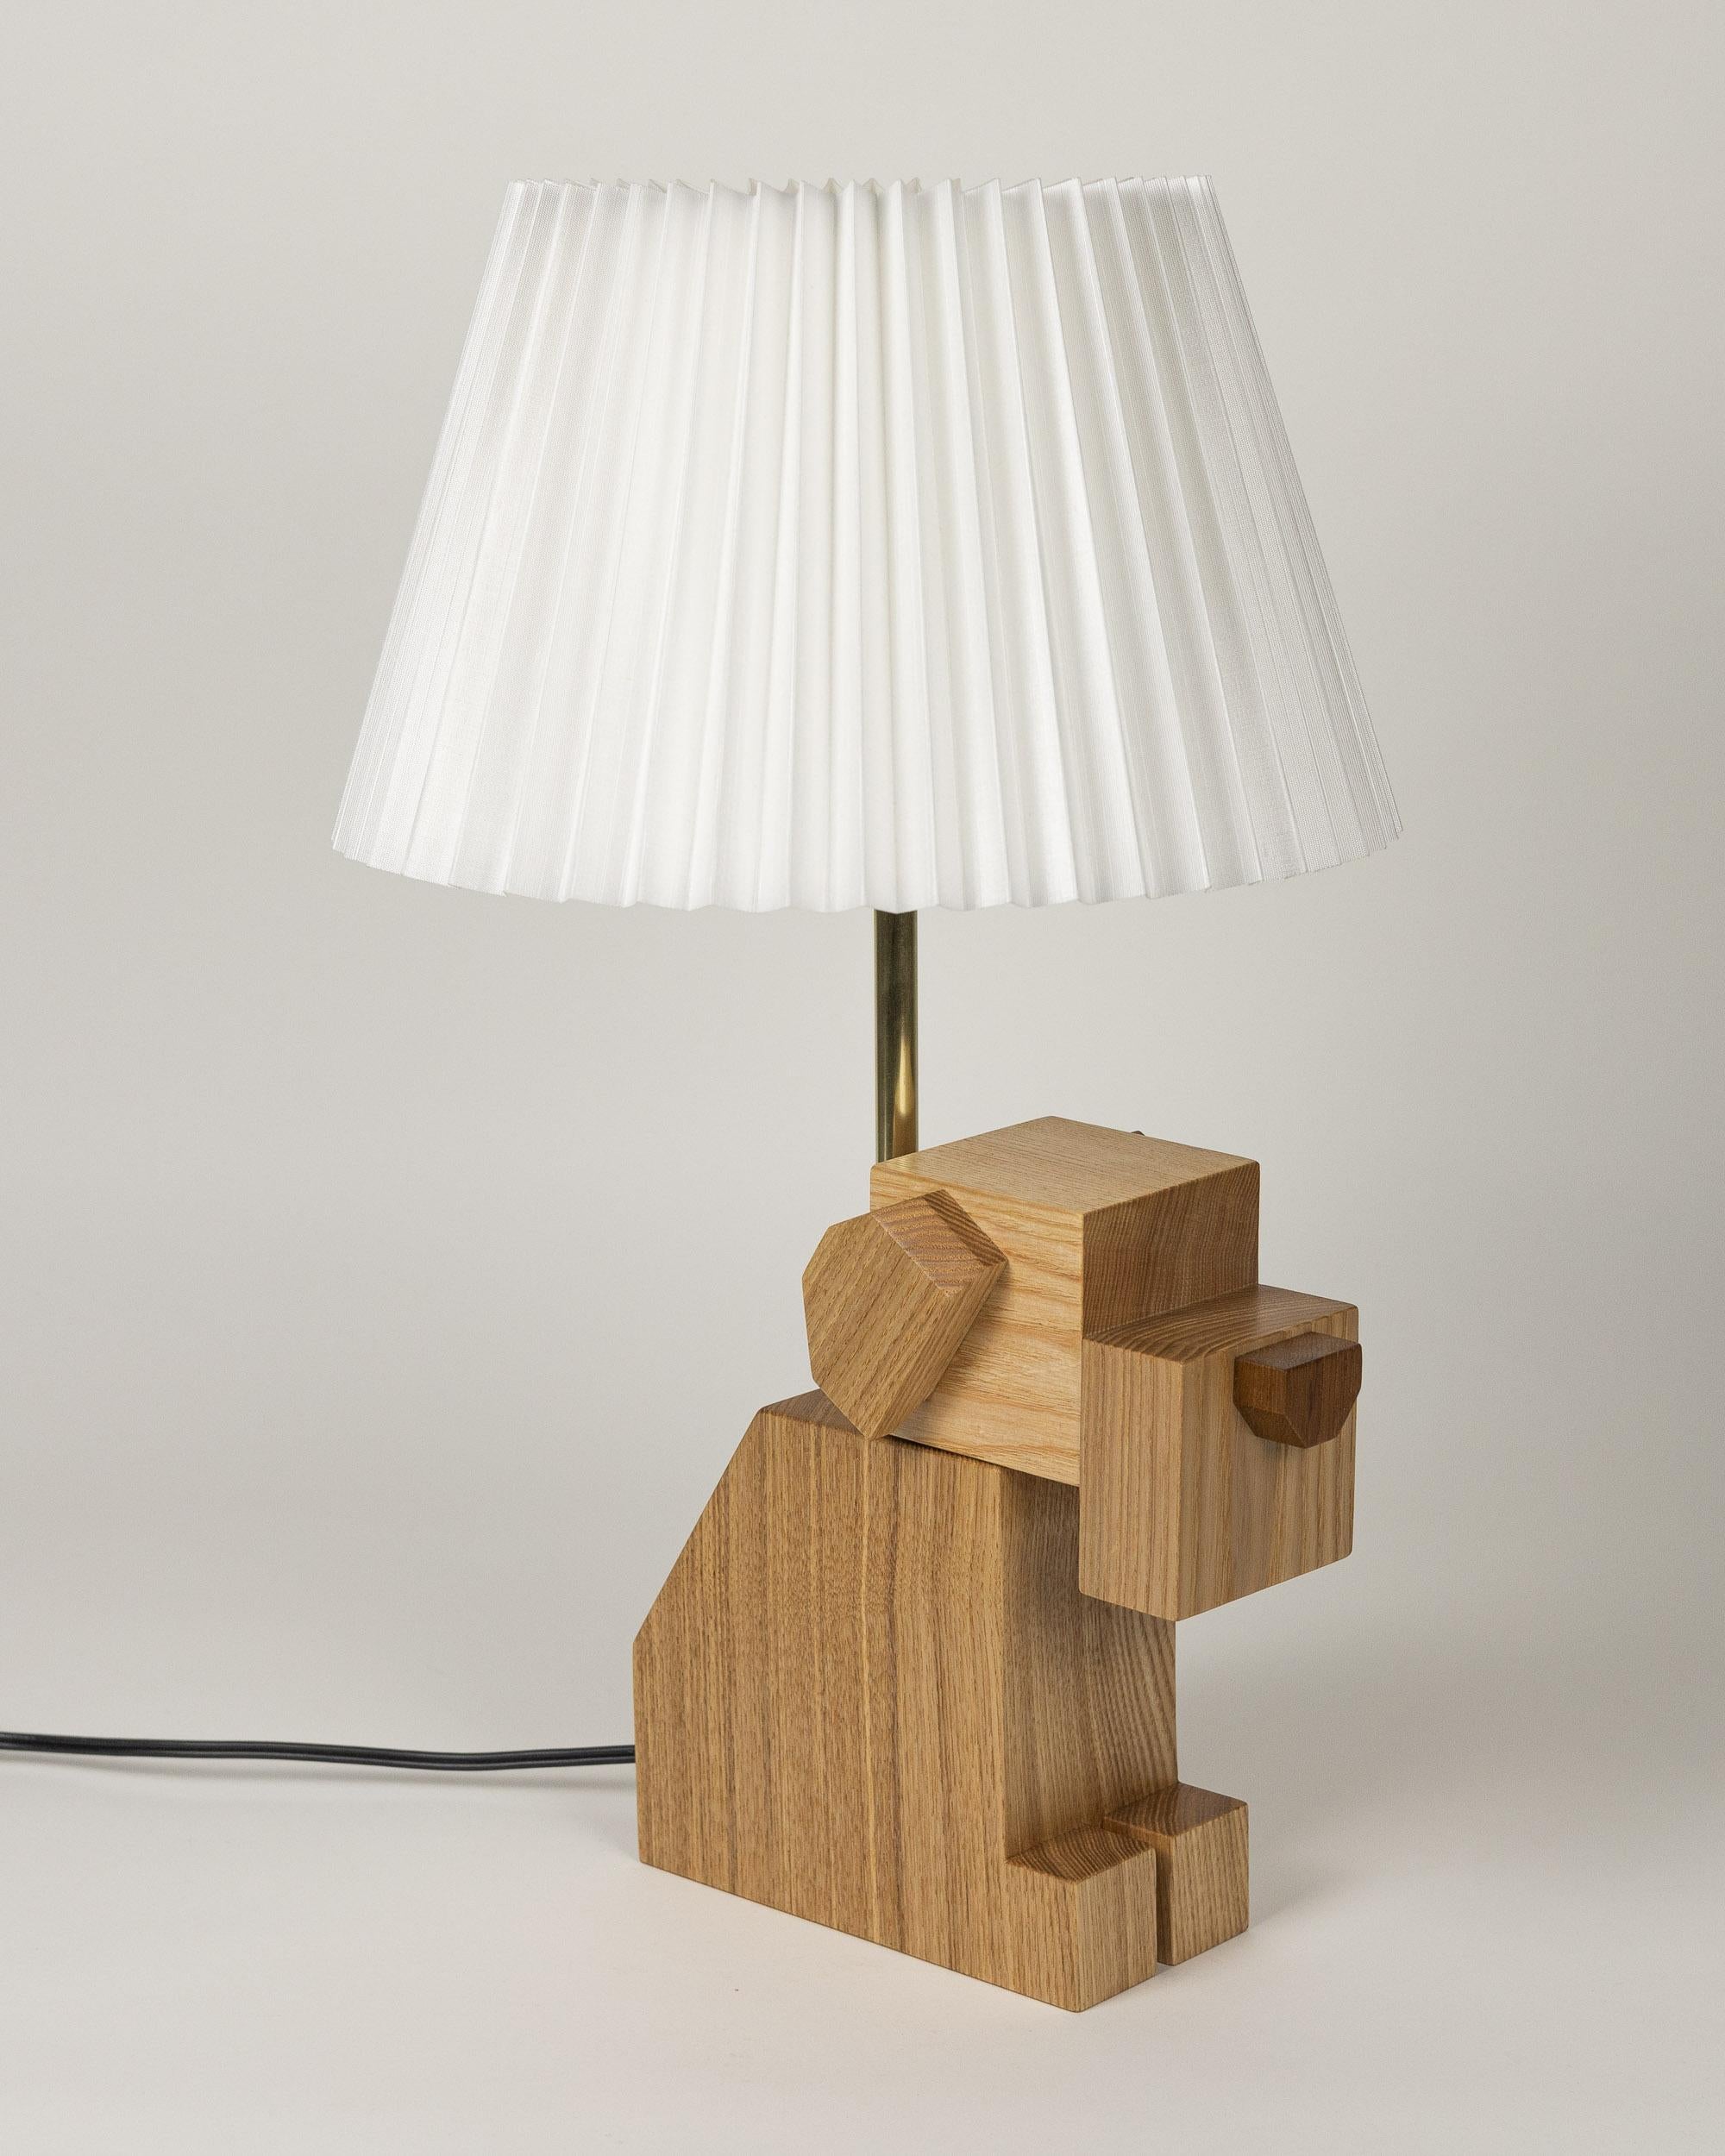 Doggy Lamp by Wan Wan Wonderland (Tokyo, Japan)

Delightful and whimsical table lamps with white pleated shades and expertly hand-crafted wooden bases. Each lamp is handcrafted by WAN(of WAN WAN WONDERLAND), an artist and dog lover, at her